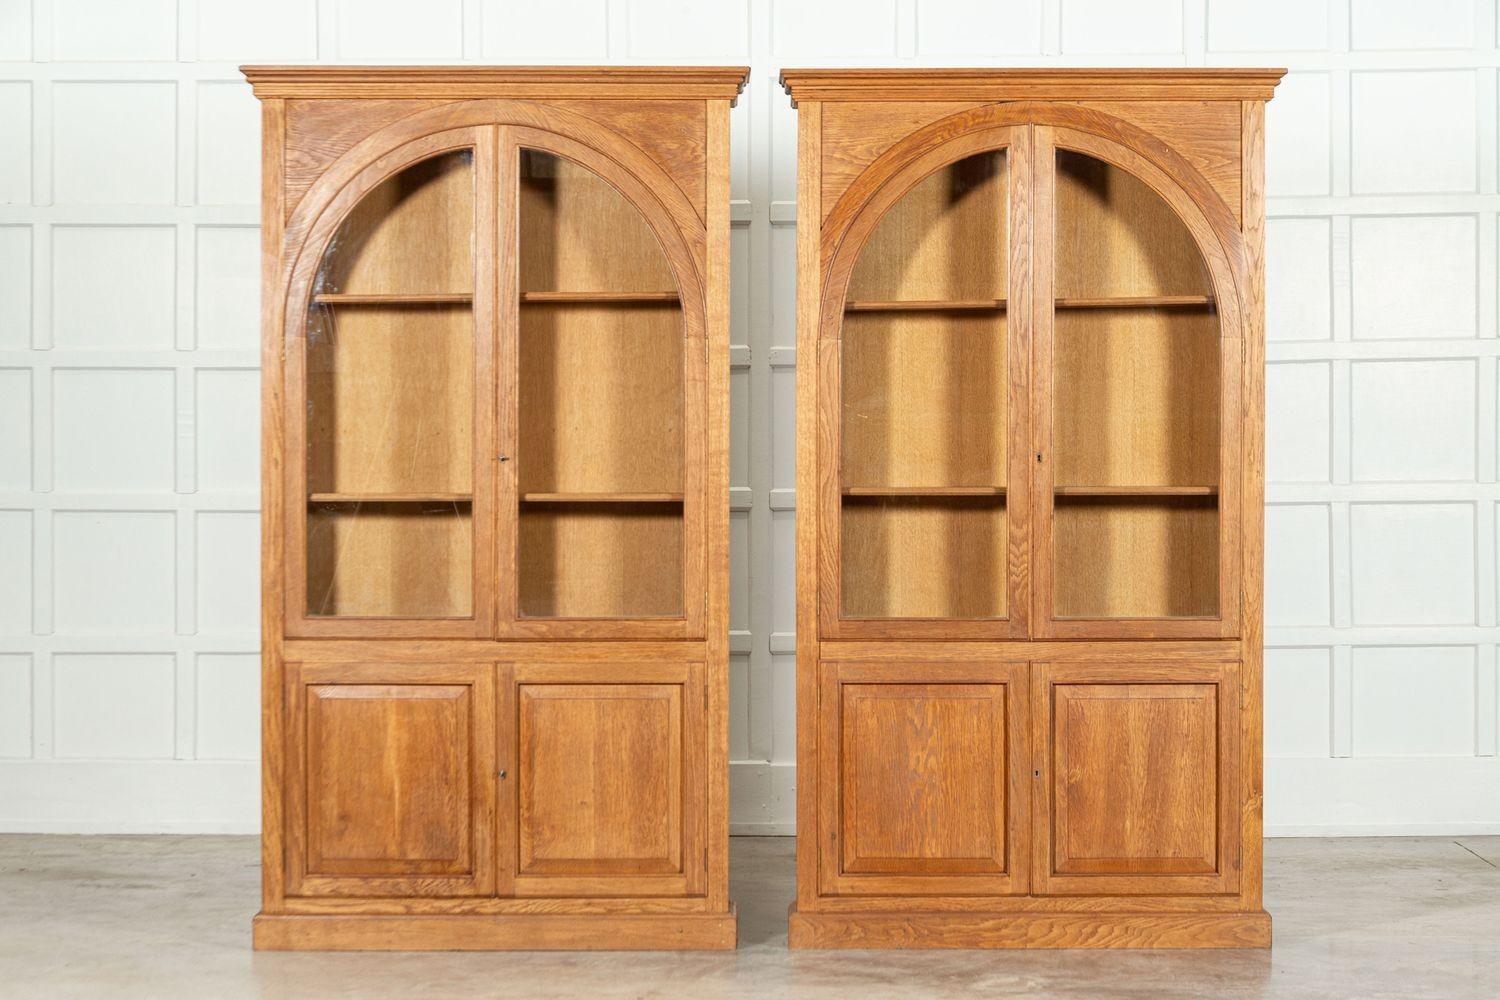 circa Mid 20thC
Pair English Oak Arched Glazed Bookcase Cabinets
Price is each
sku 1796
W110 x D23 x H192 cm
Weight 57 kg